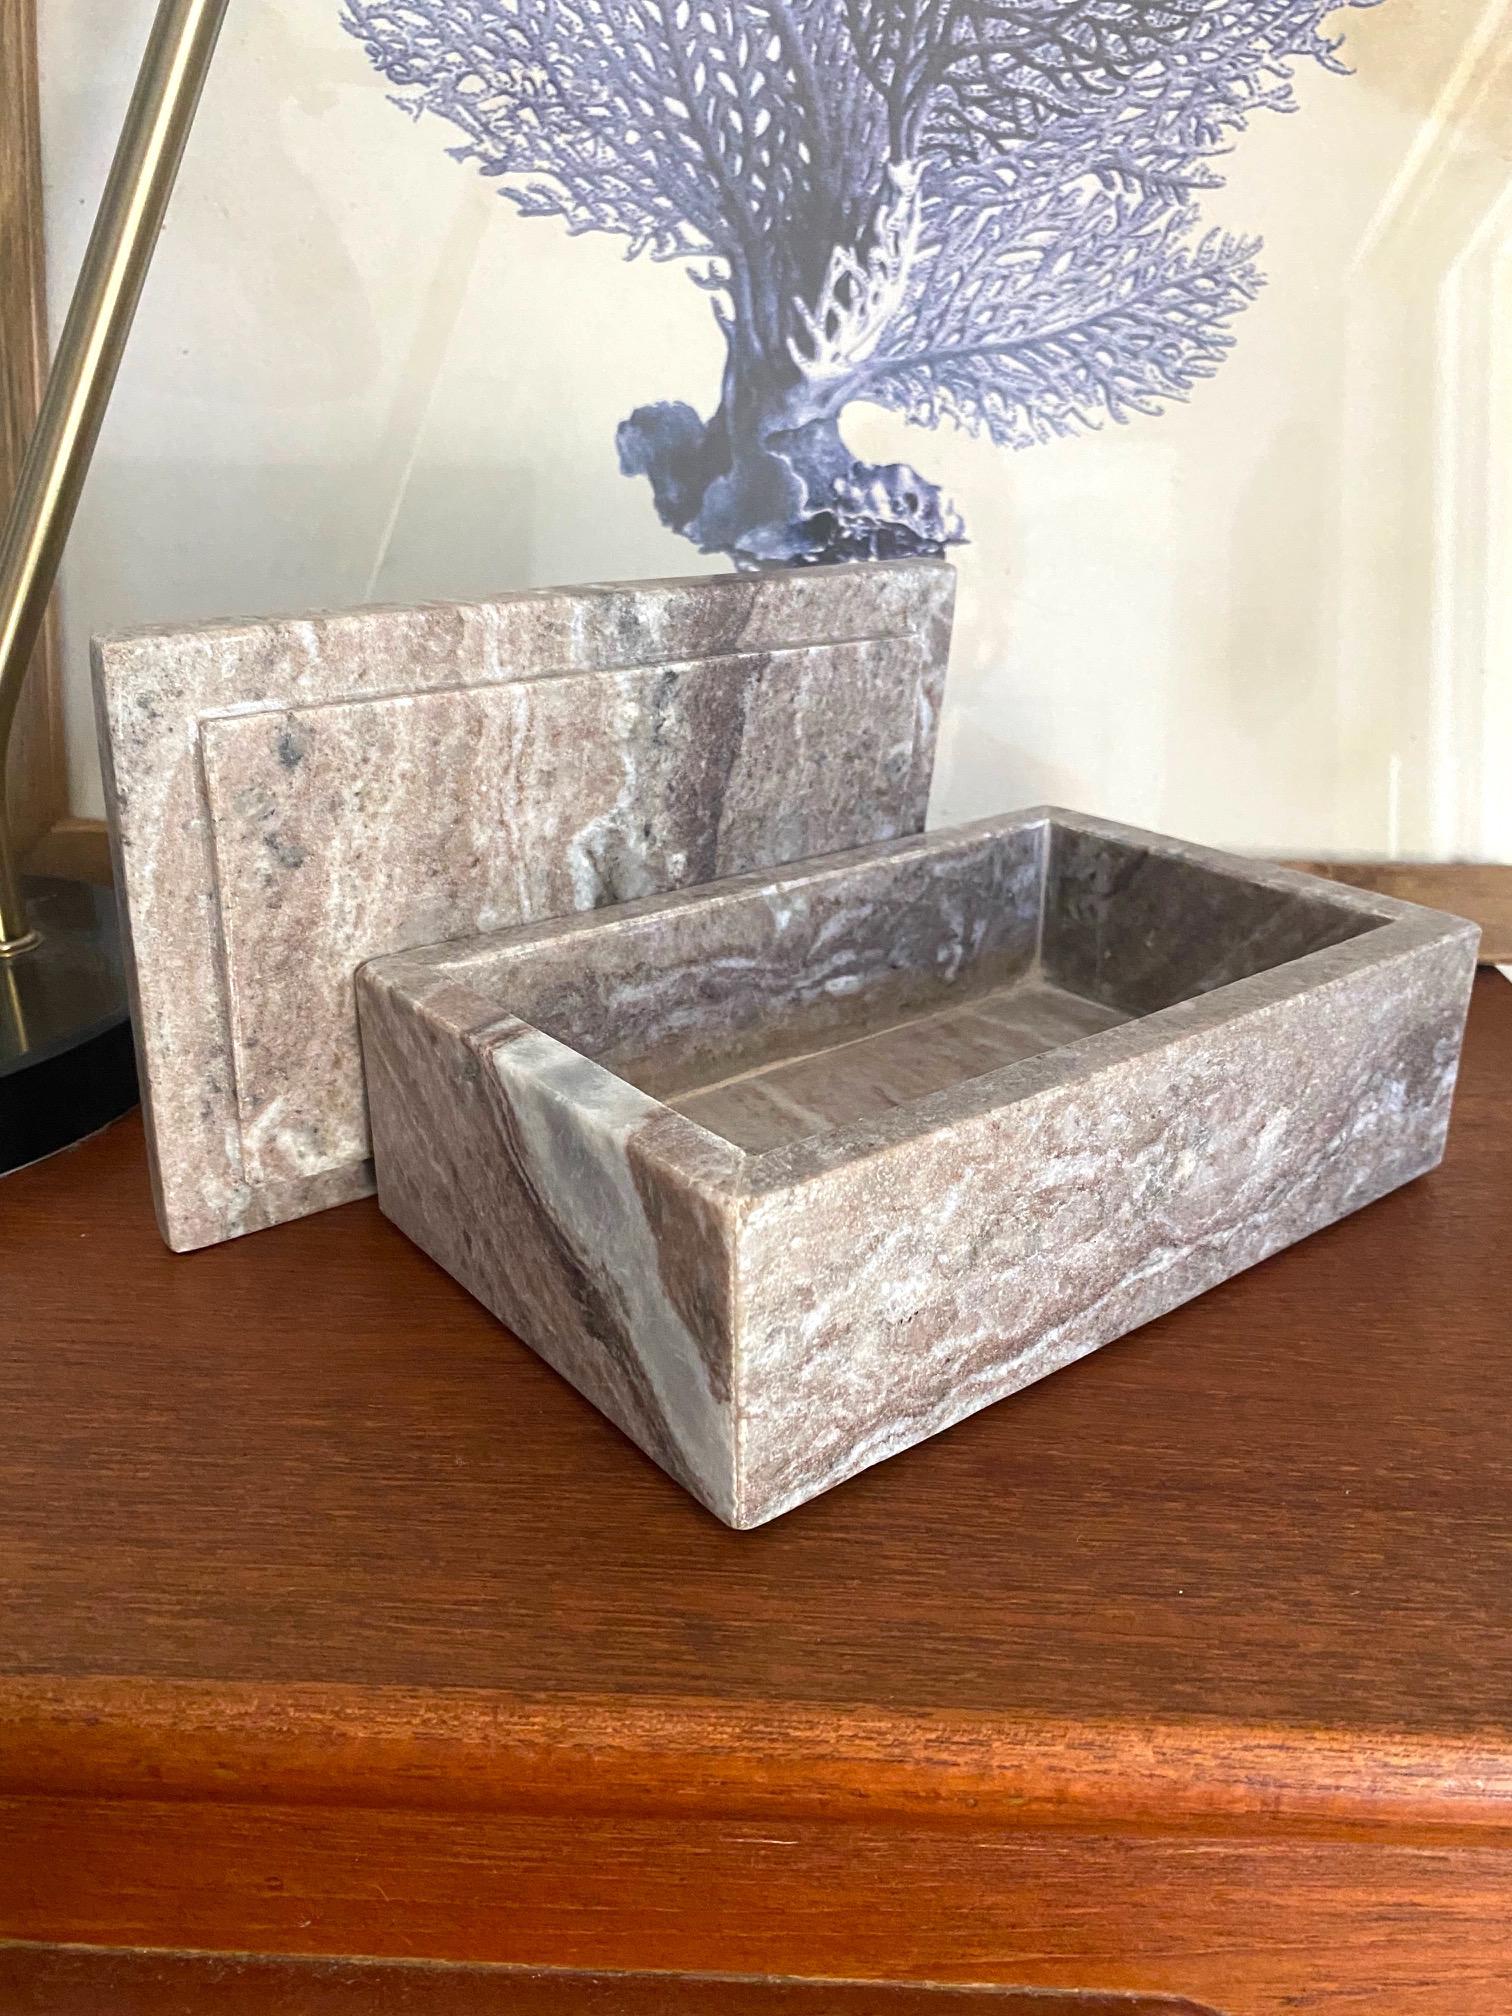 Contemporary Marble Stone Box with Stripes in Brown, Grey, and White